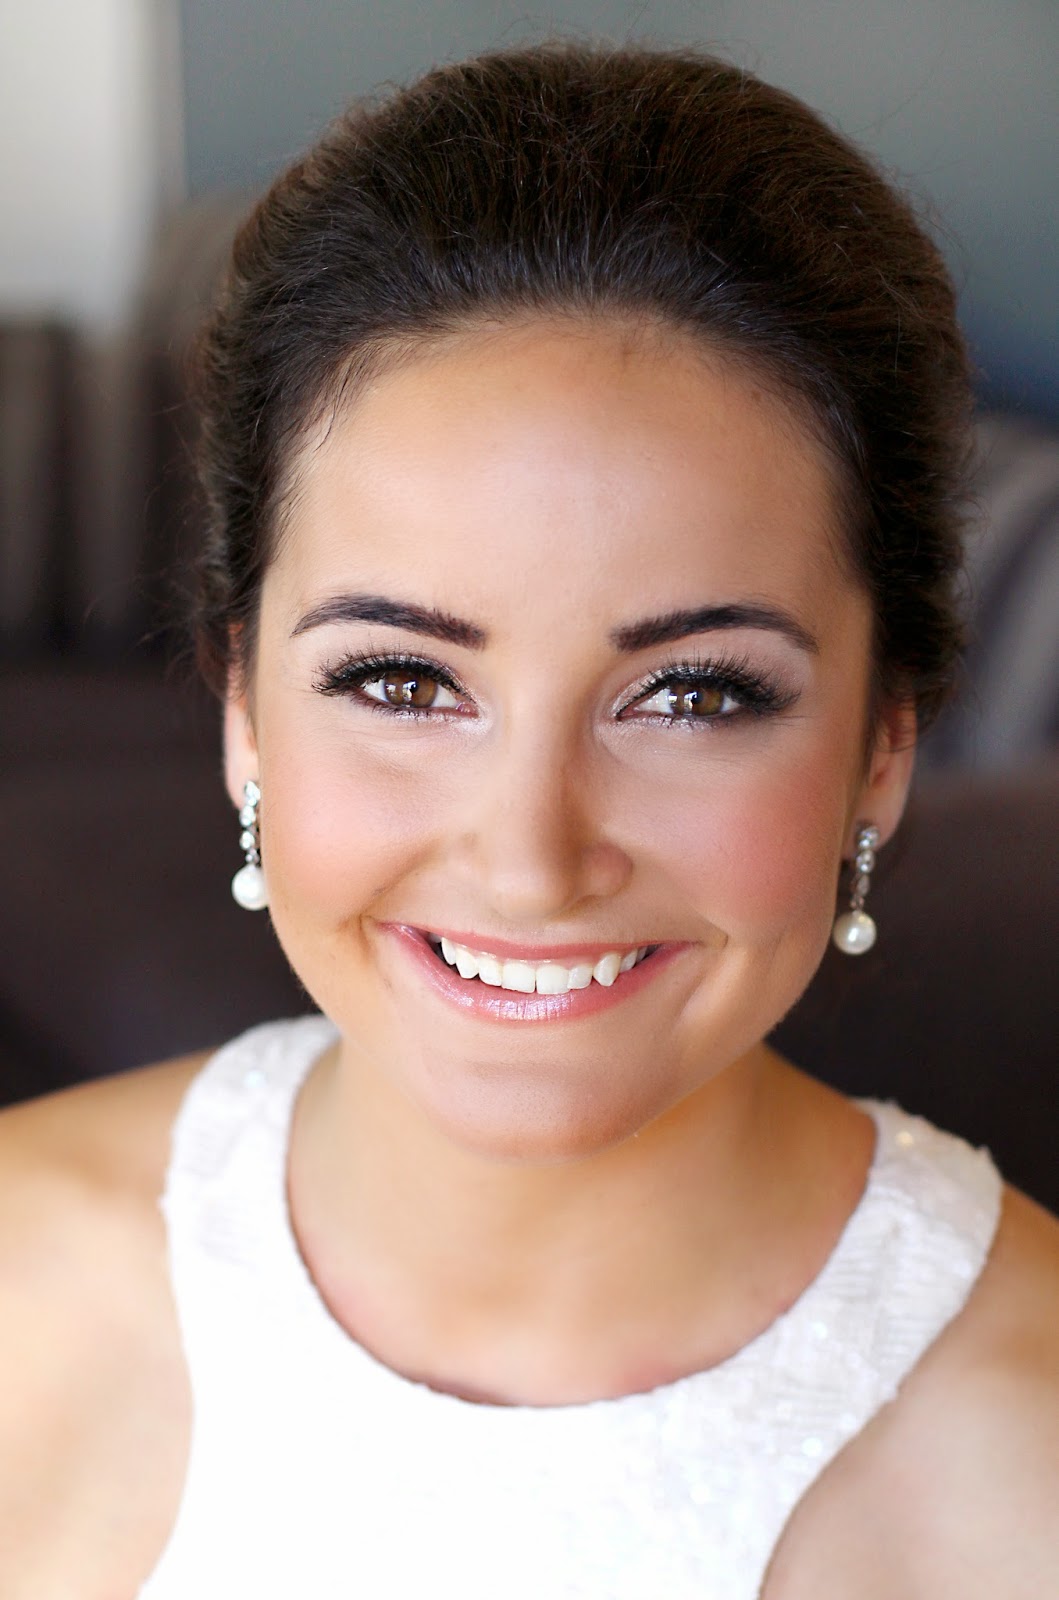 Stunning Natural bridesmaid or bridal makeup. Makeup by Katie Dawson from Perle Jewellery & Makeup 